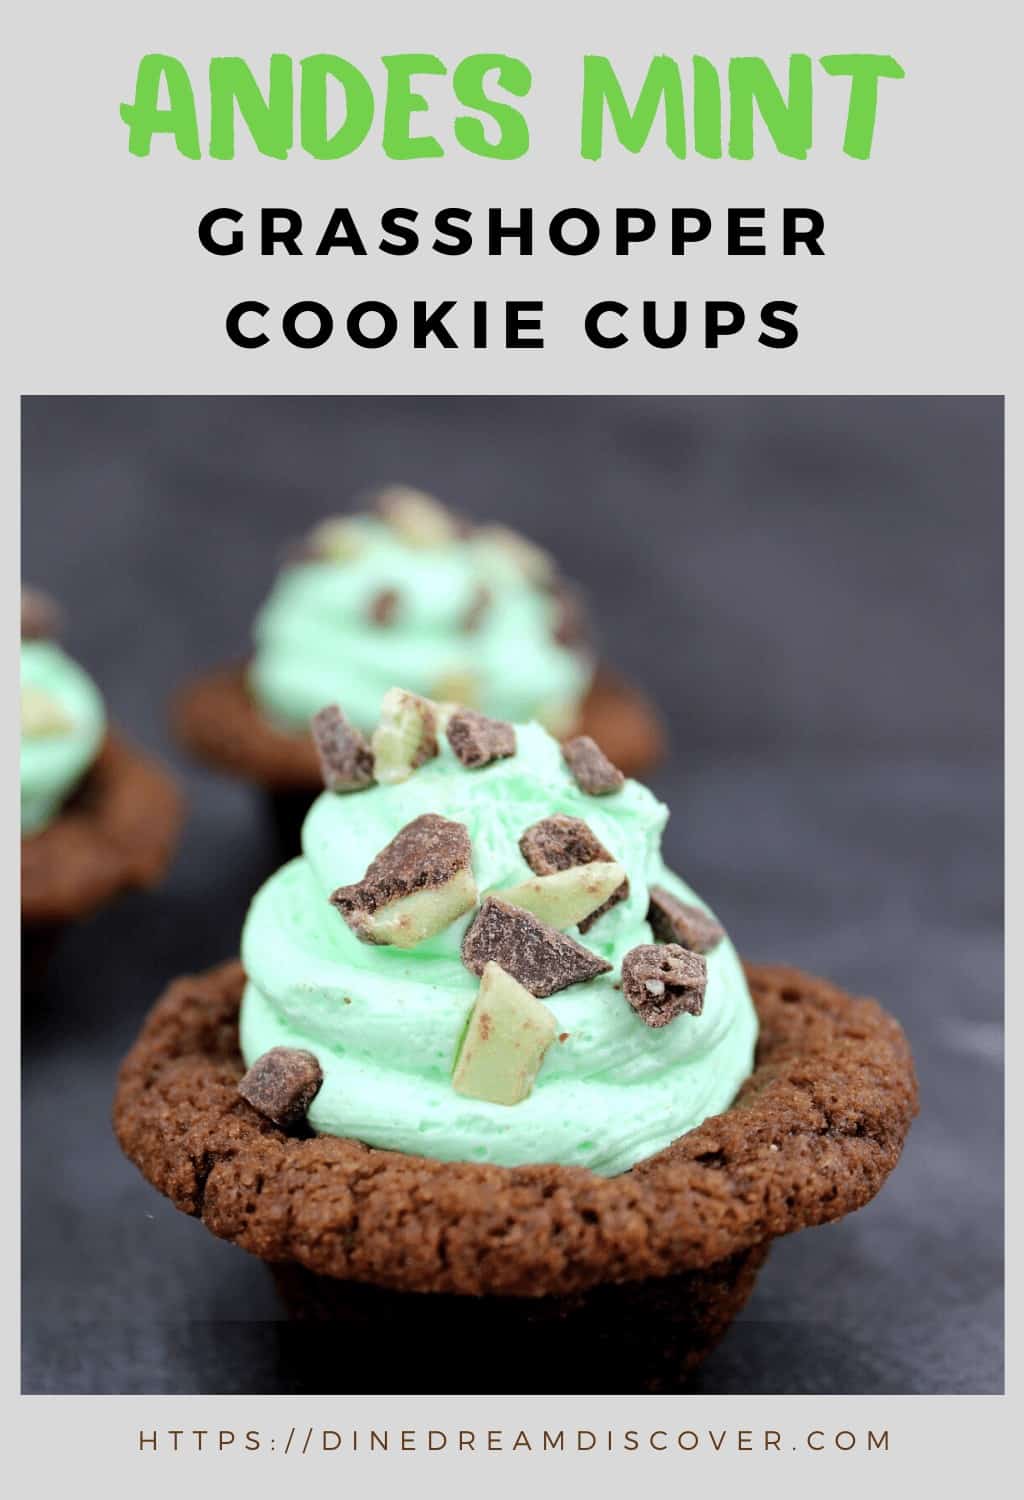 Andes Grasshopper Cookie Cups